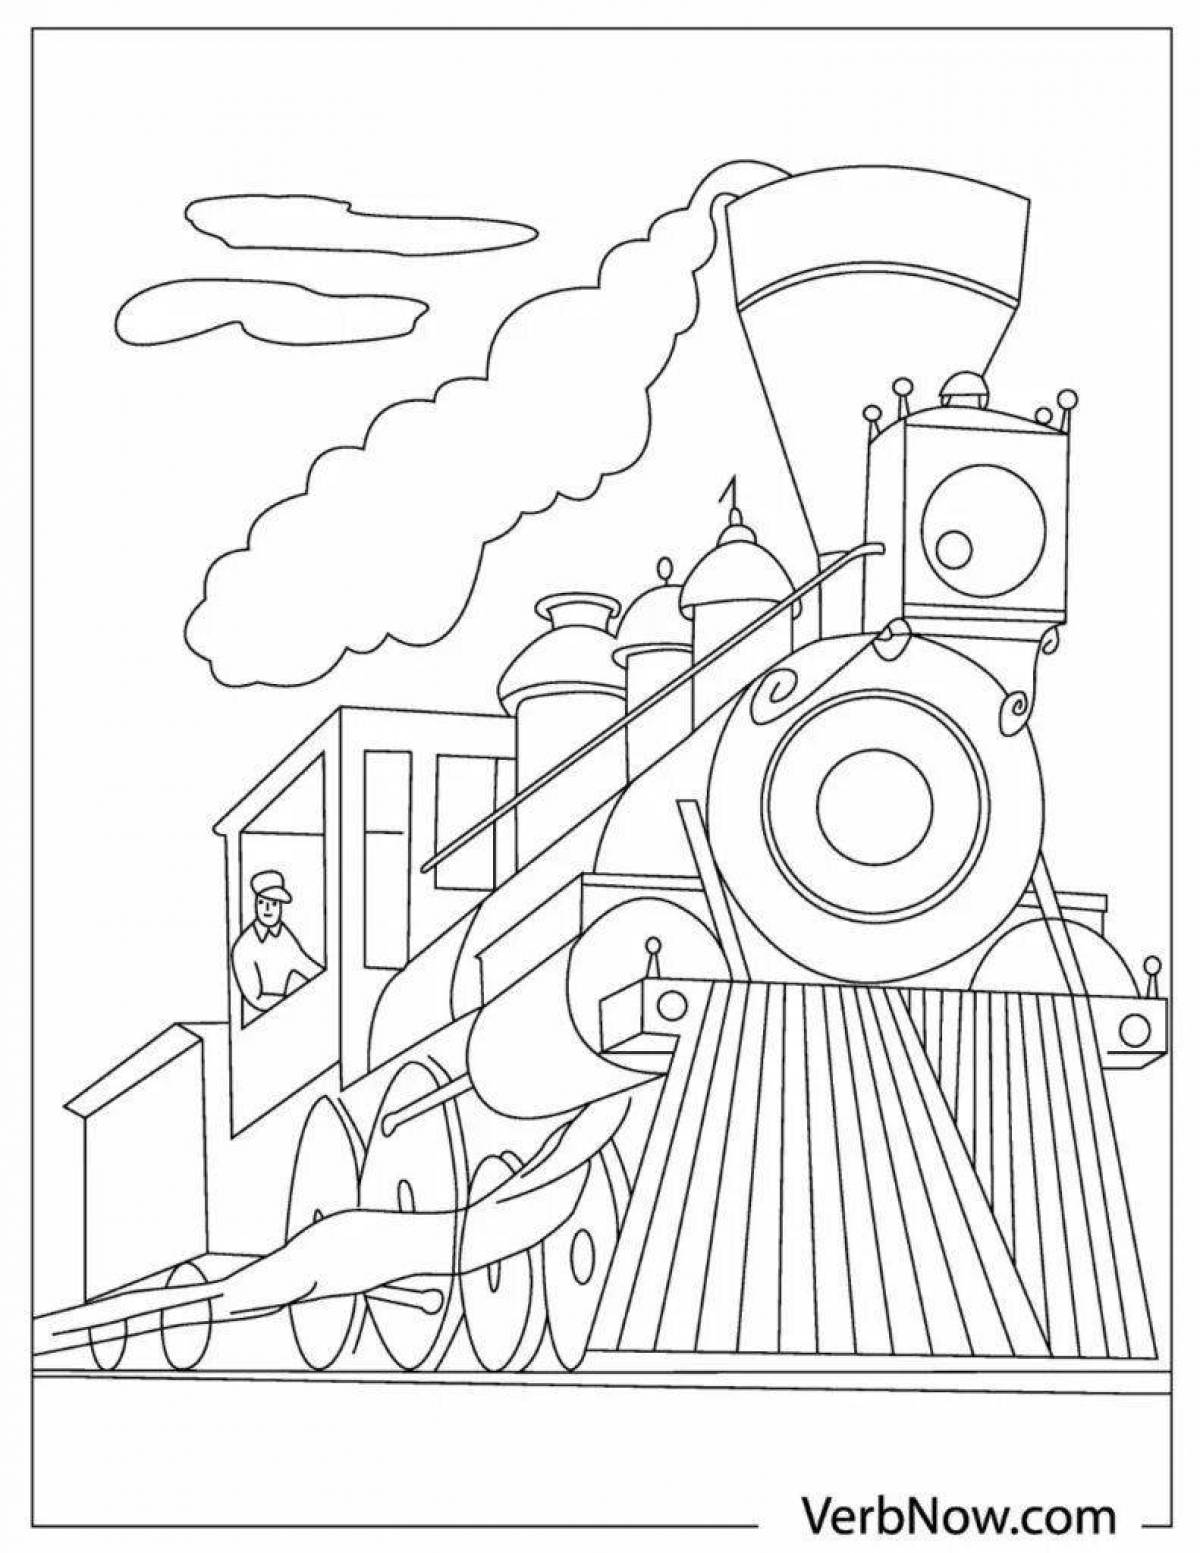 Playful driver coloring page